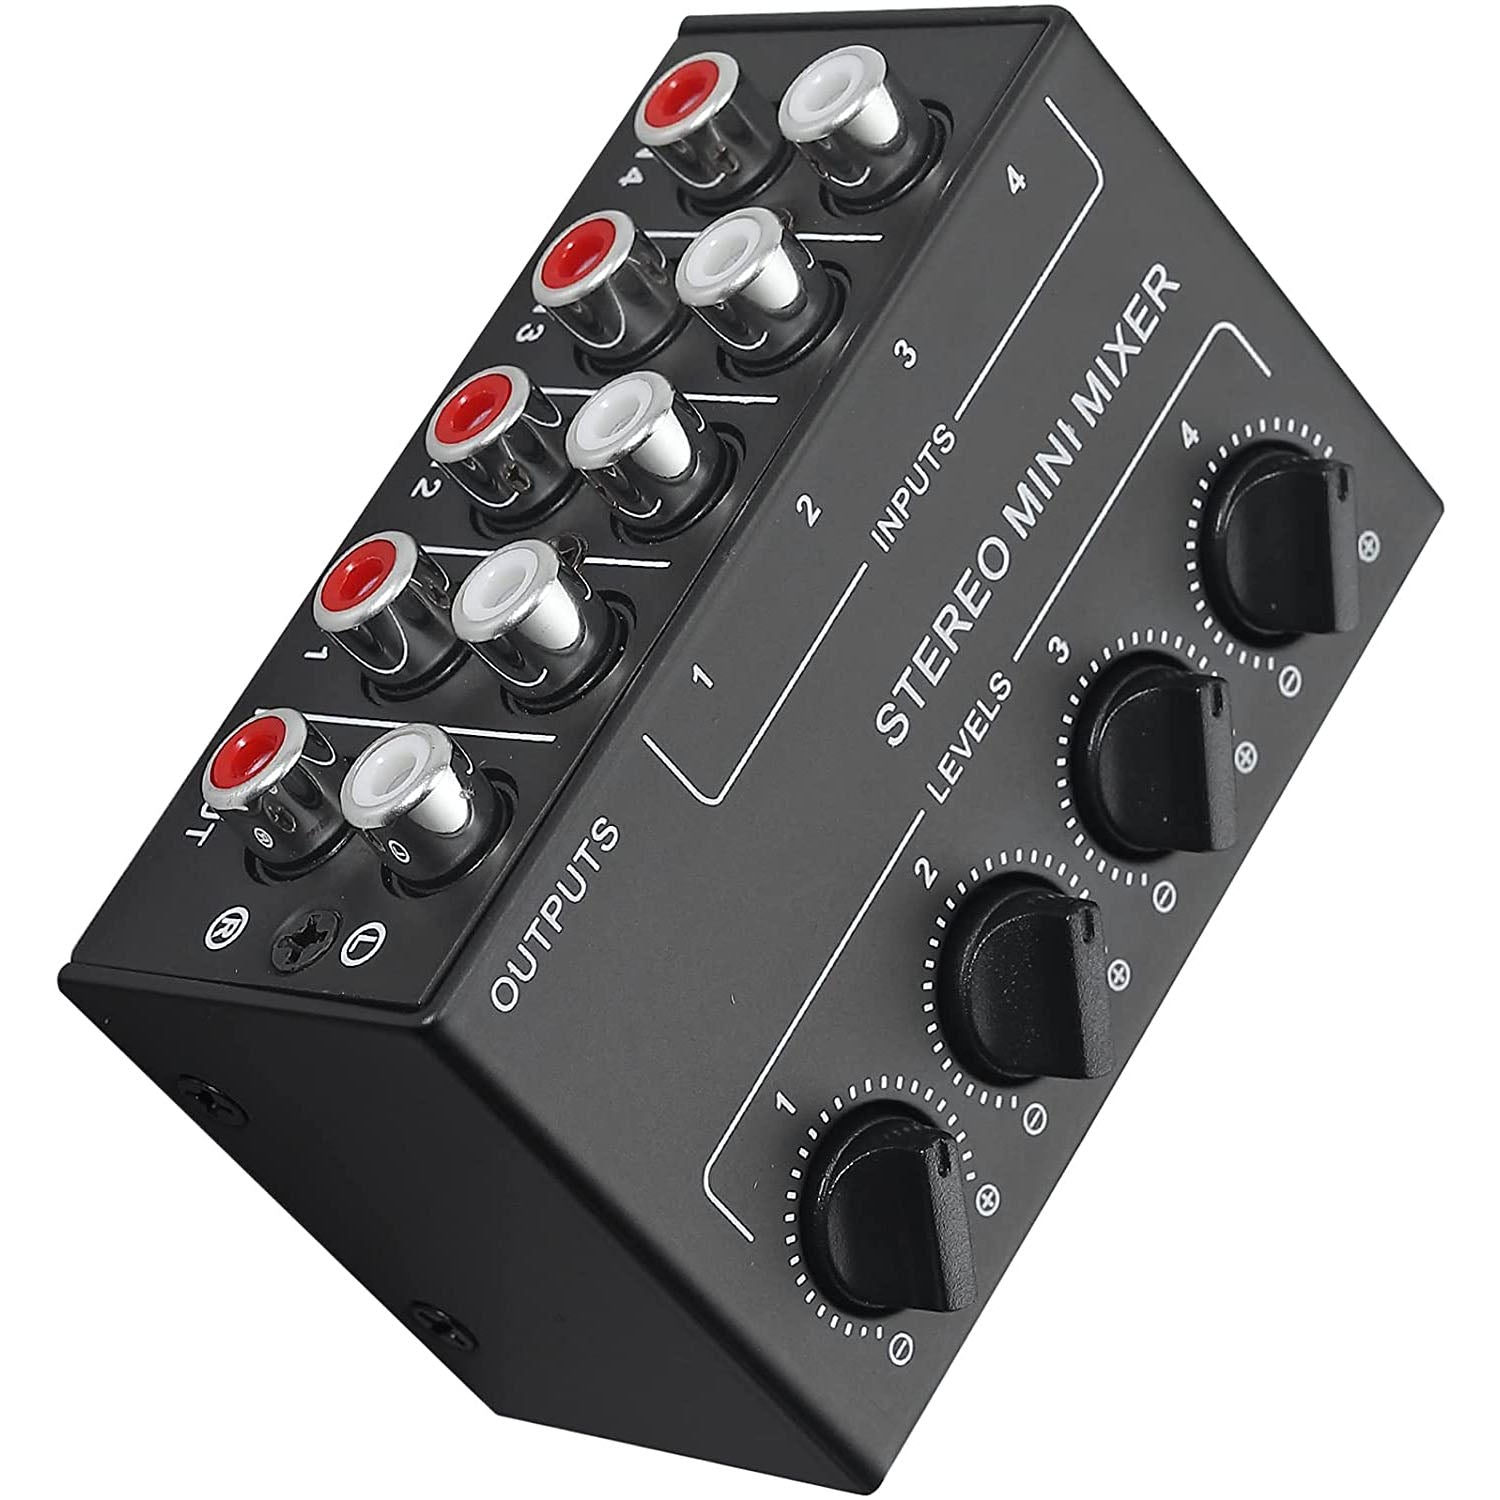 LiNKFOR 4 Channel Stereo Audio Mixer – LiNKFOR Store